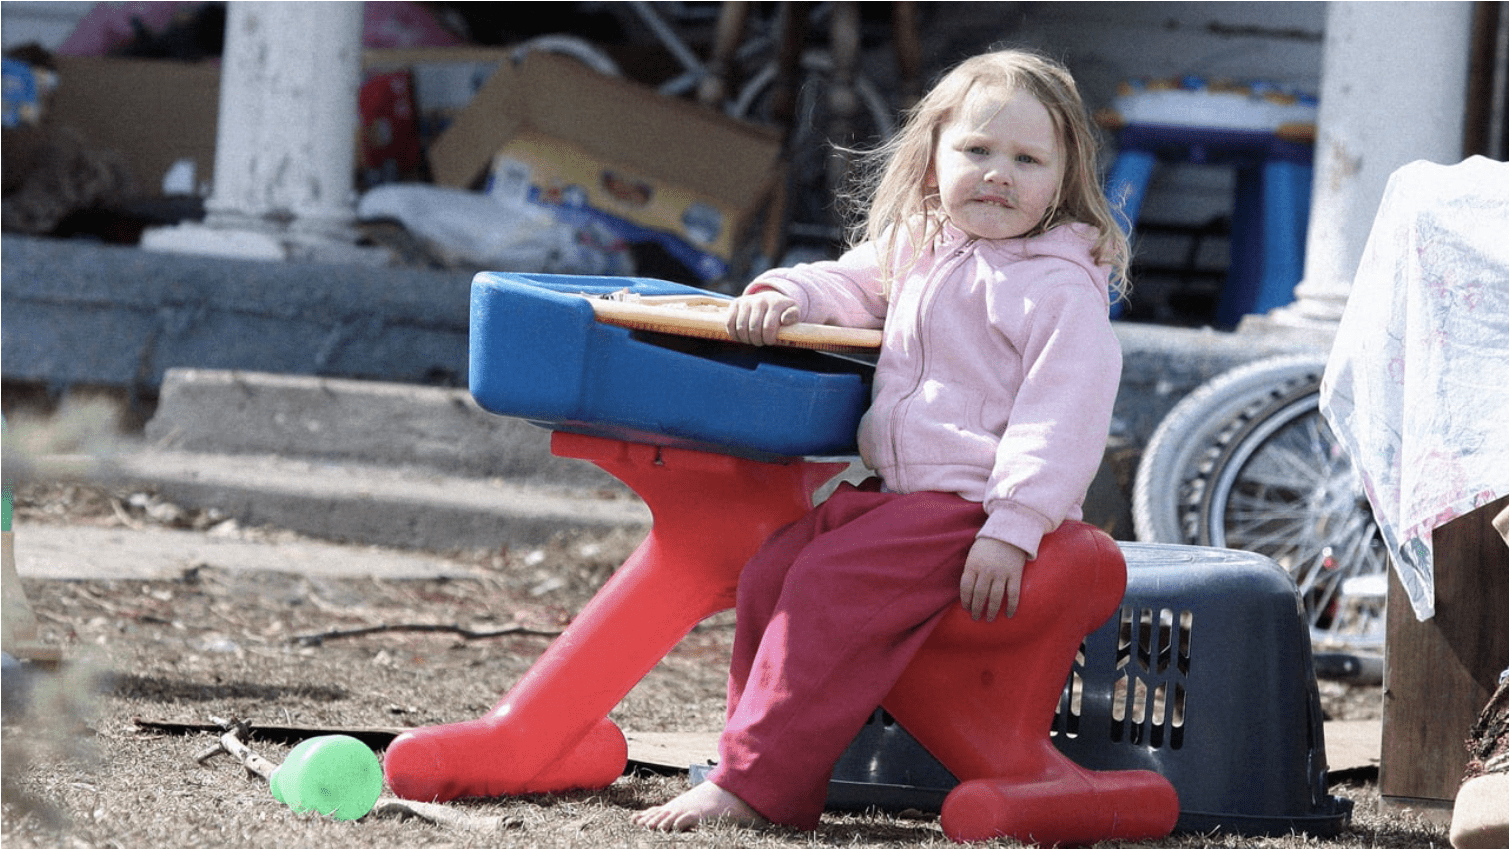 A child with no shoes, pink pants, and a light pink jacket sits on a red, blue, and yellow hard plastic toy. She is in a backyard surrounded by gray dirt, trash, and other junk. Her face is dirty, and her hair is messy.